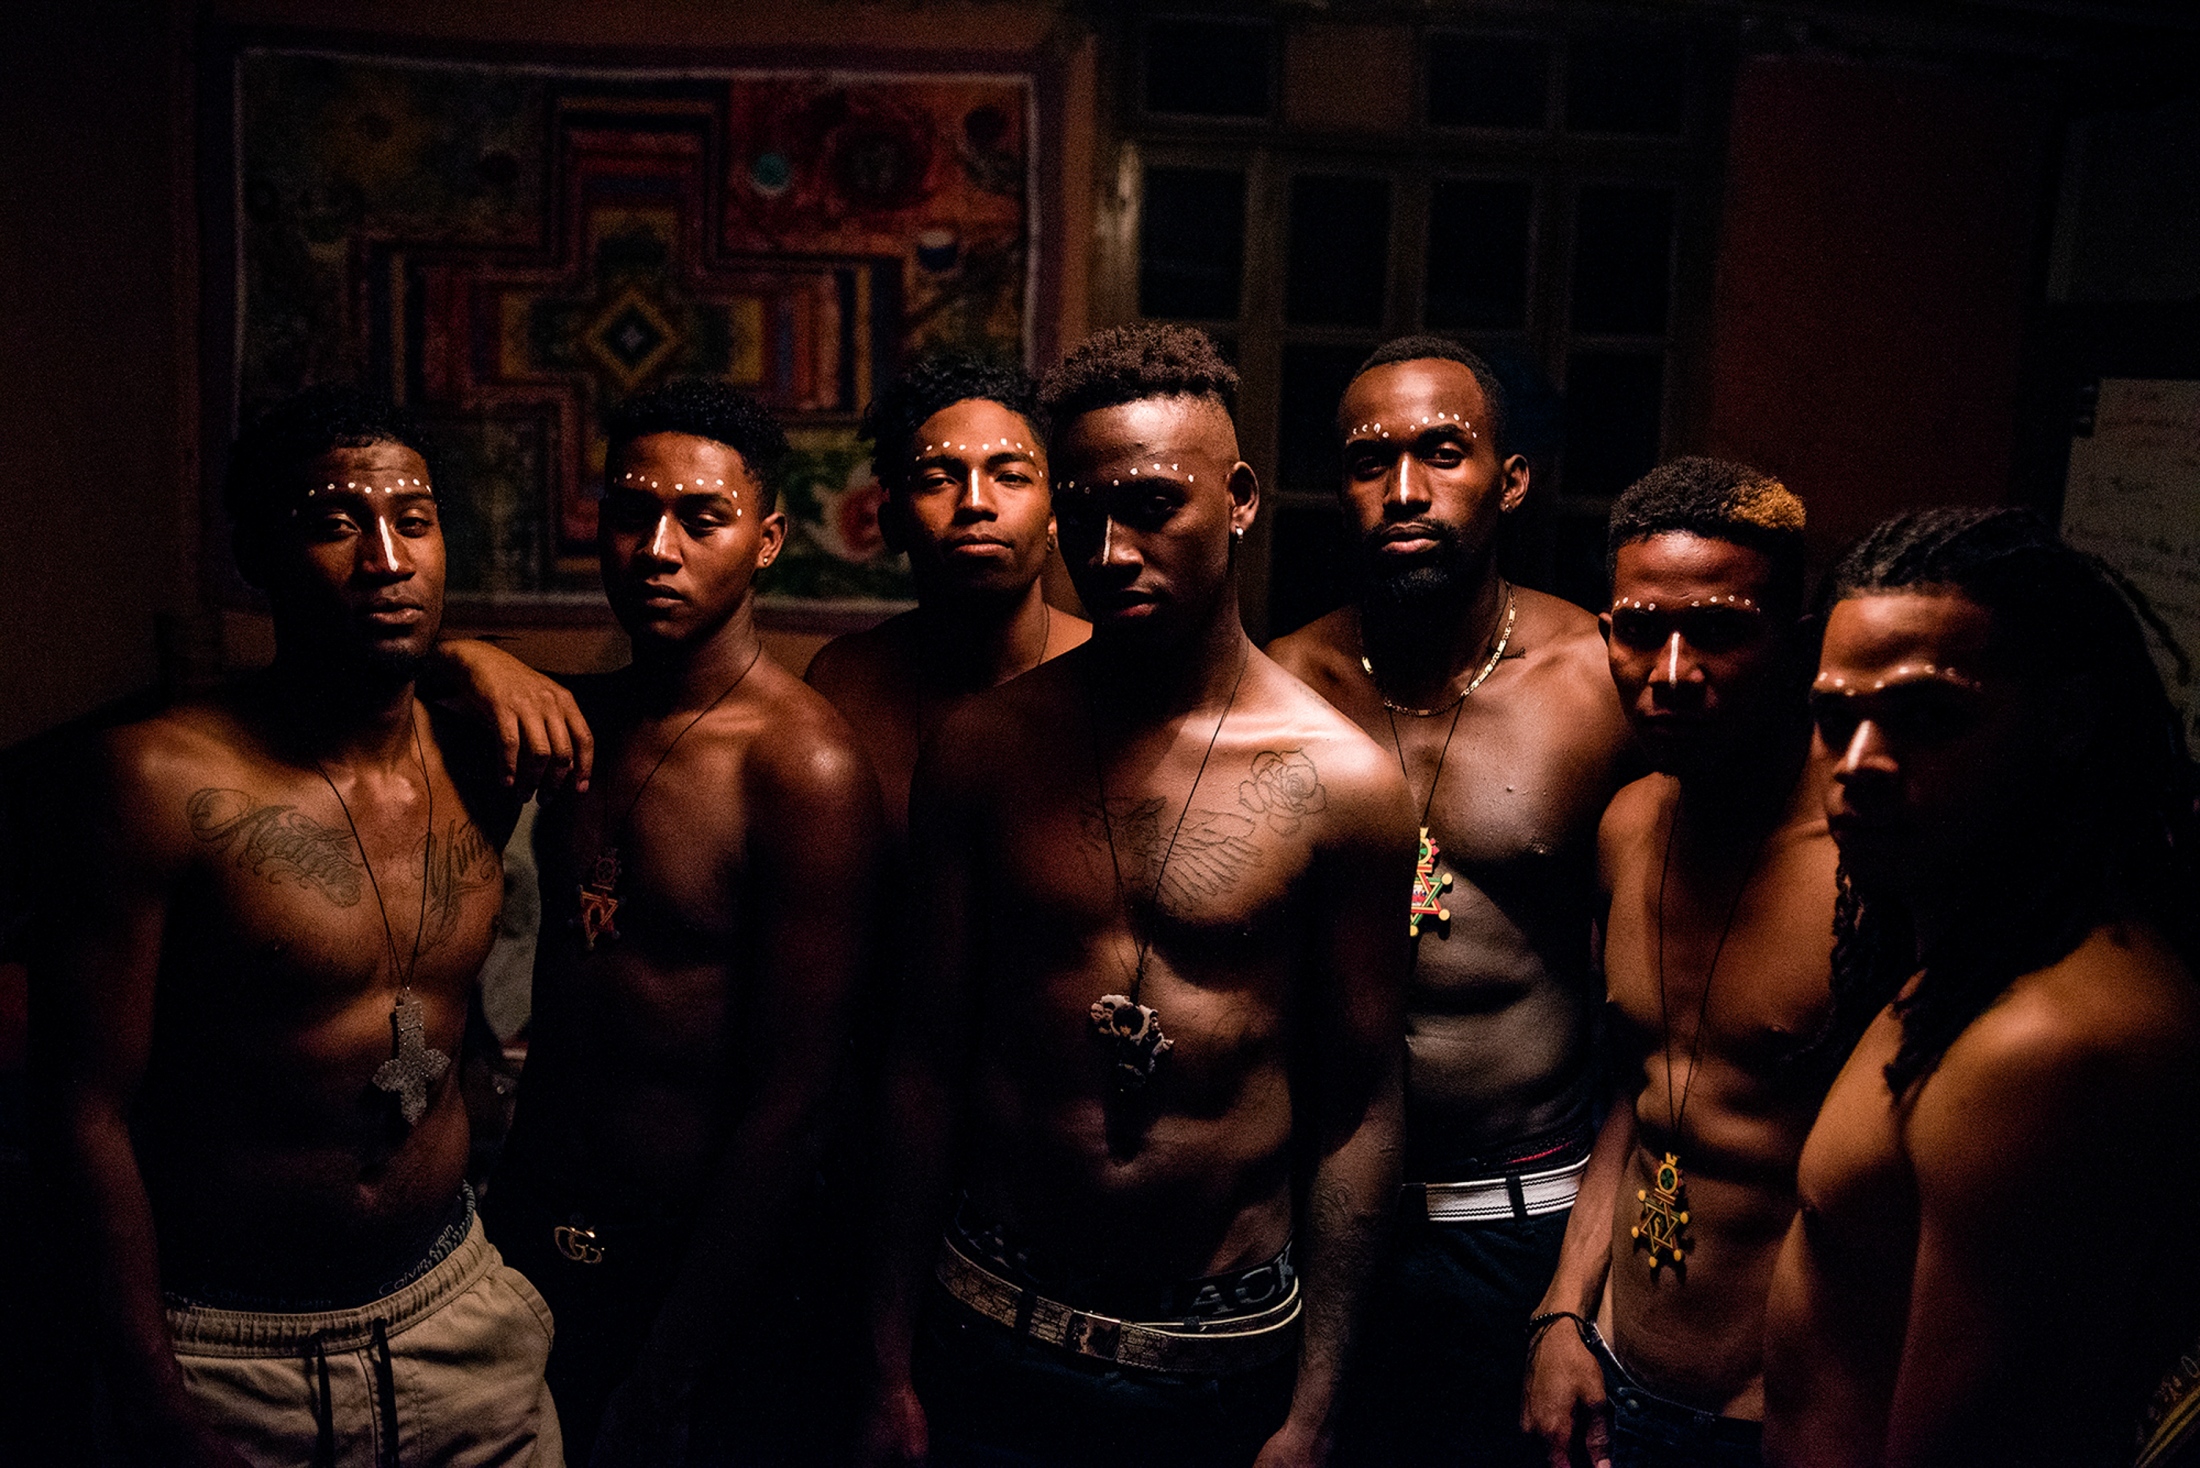  Addis Abbeba is an activist group that works with the black youth to rescue ancestral spirituality and fight racism. In African spirituality, the &quot;Orishas&quot; (African deities) have no gender. Johis Alarc&oacute;n 